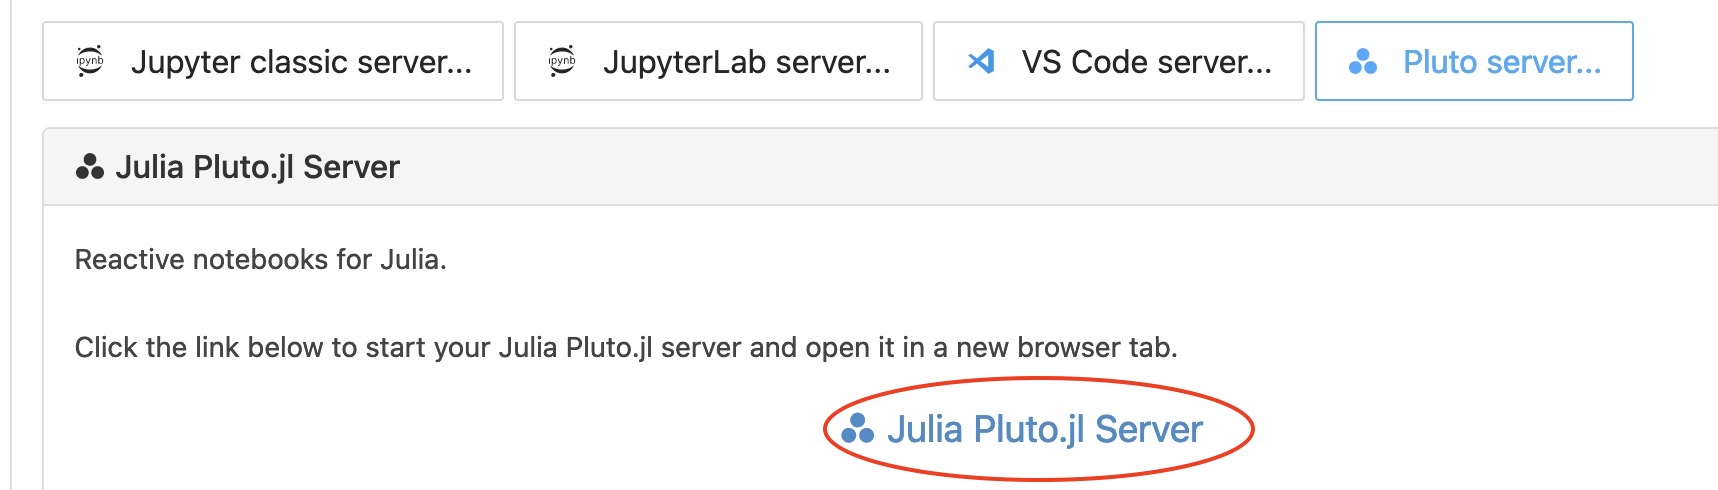 Link to open Pluto server in a new browser tab